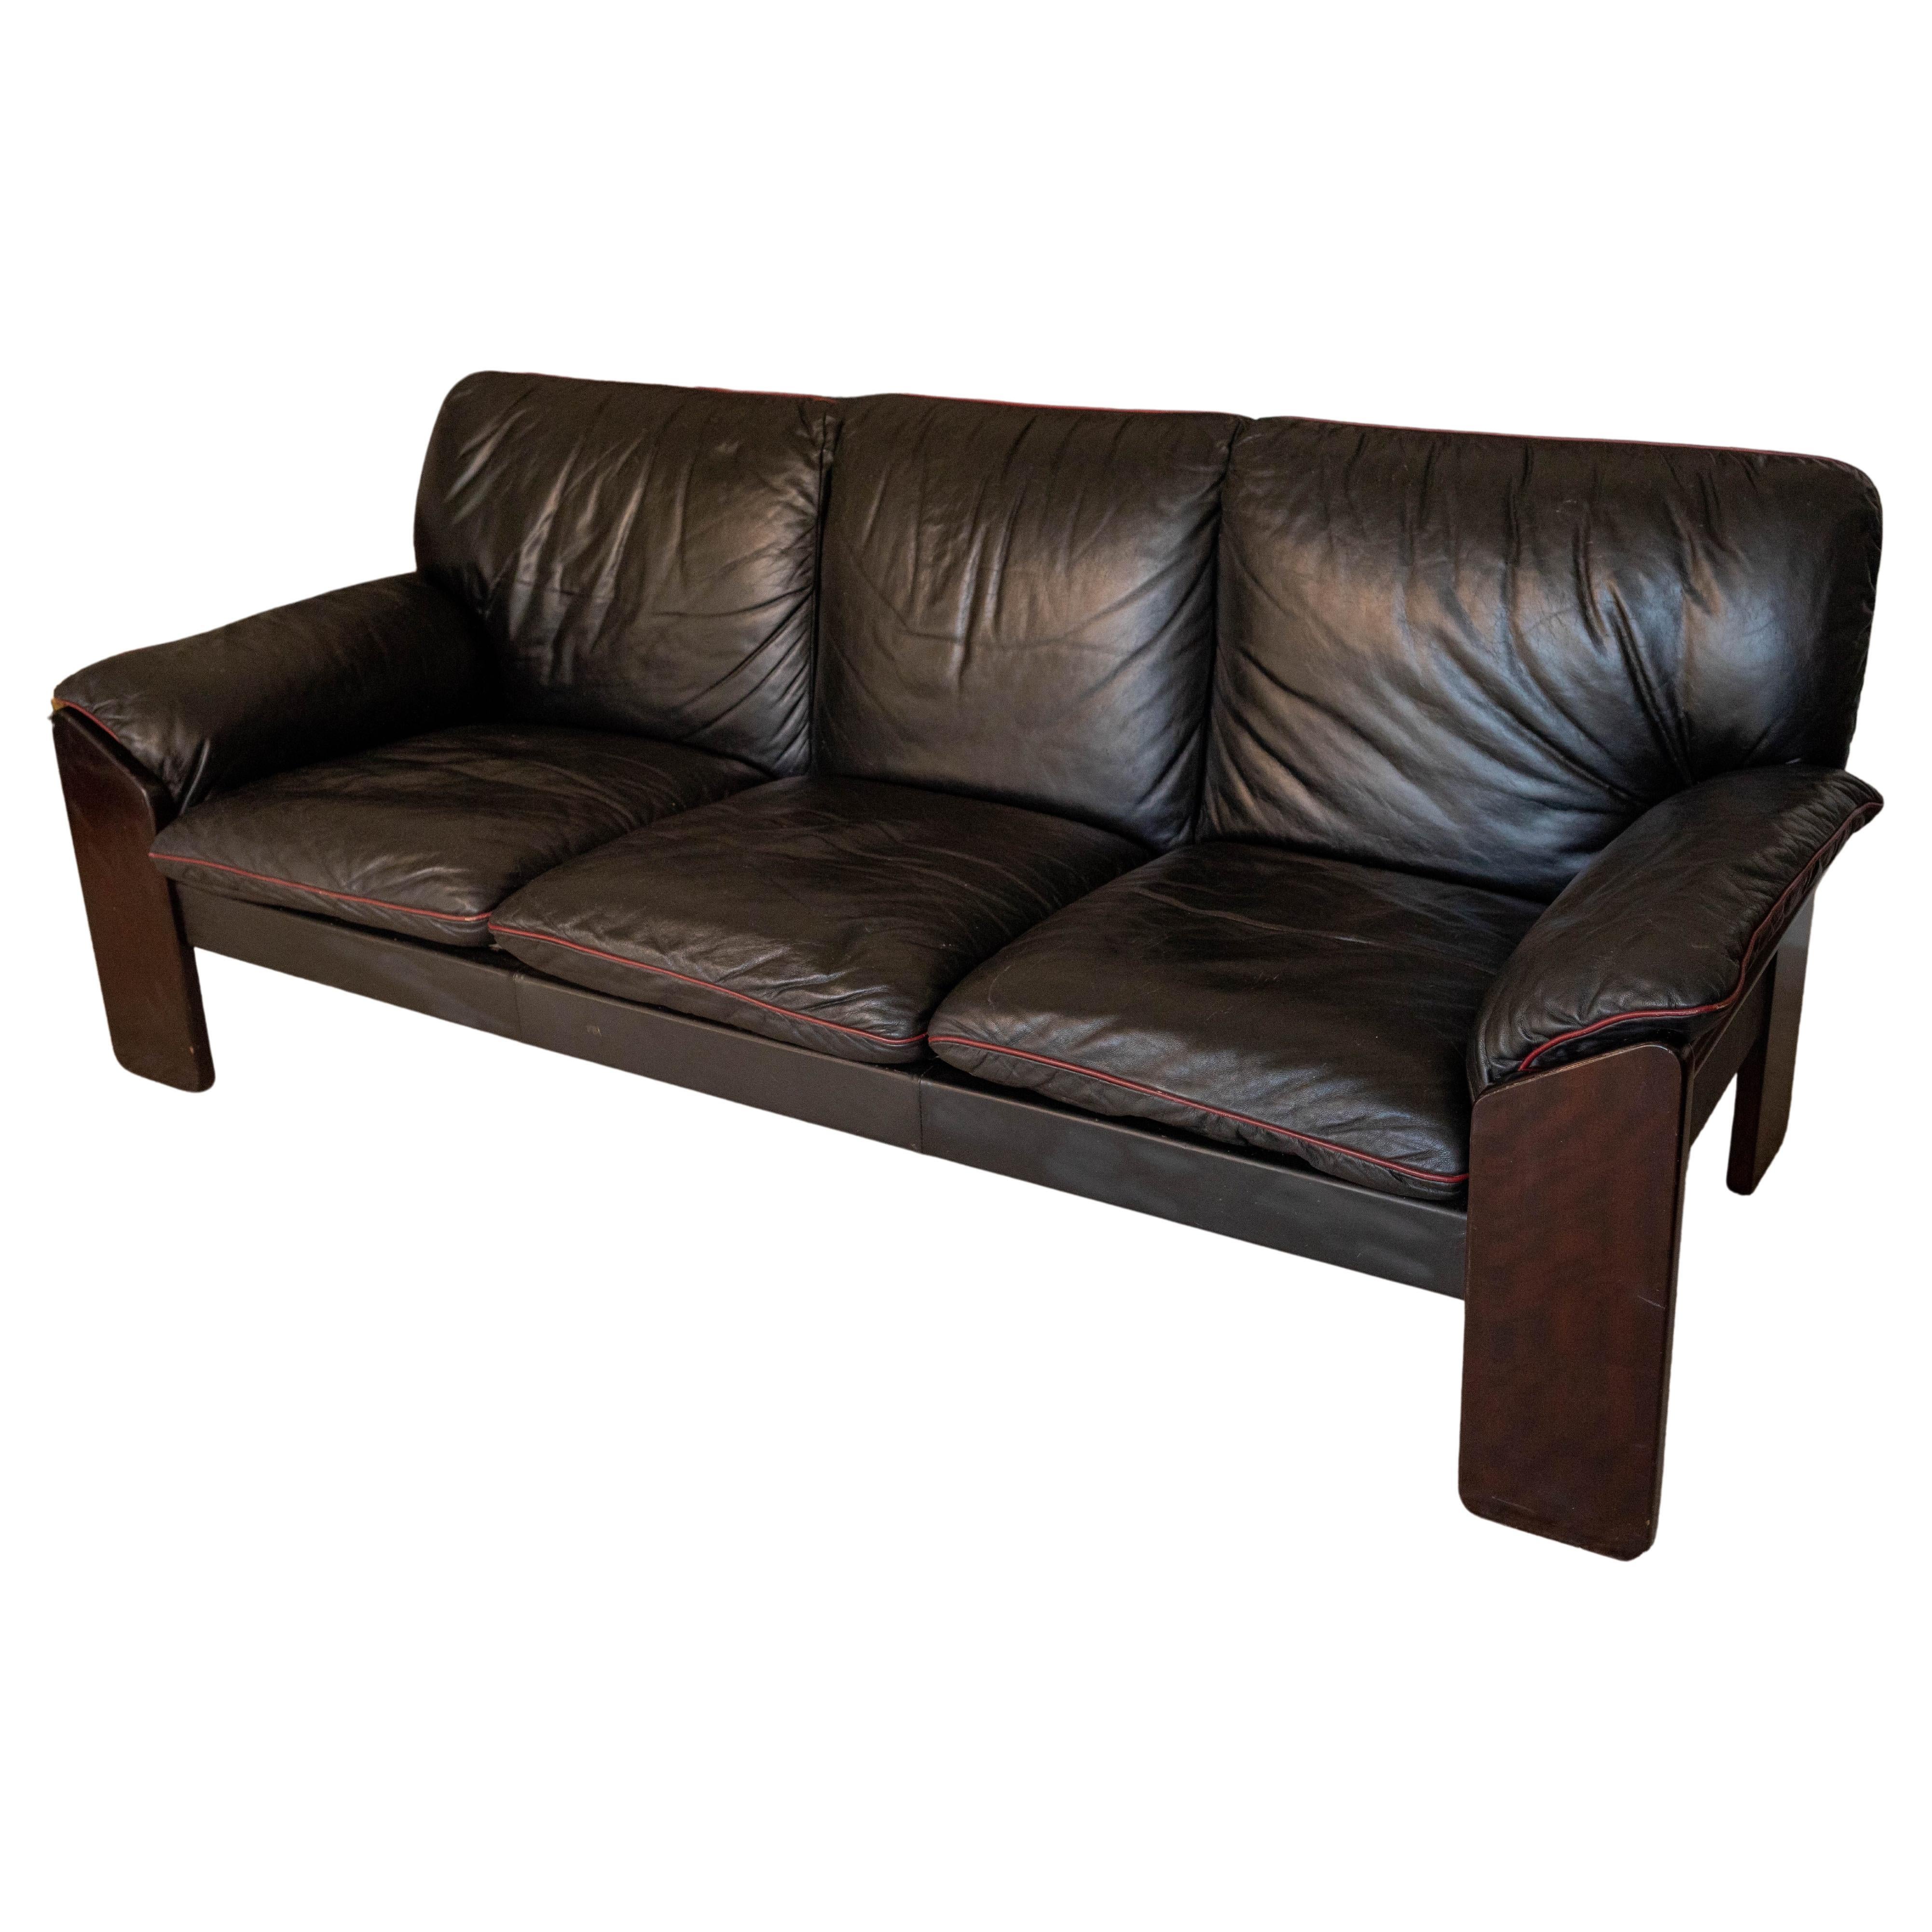 Jean Gillon for Probel Leather and Brazilian Rosewood Sofa, c. 1970, Signed For Sale